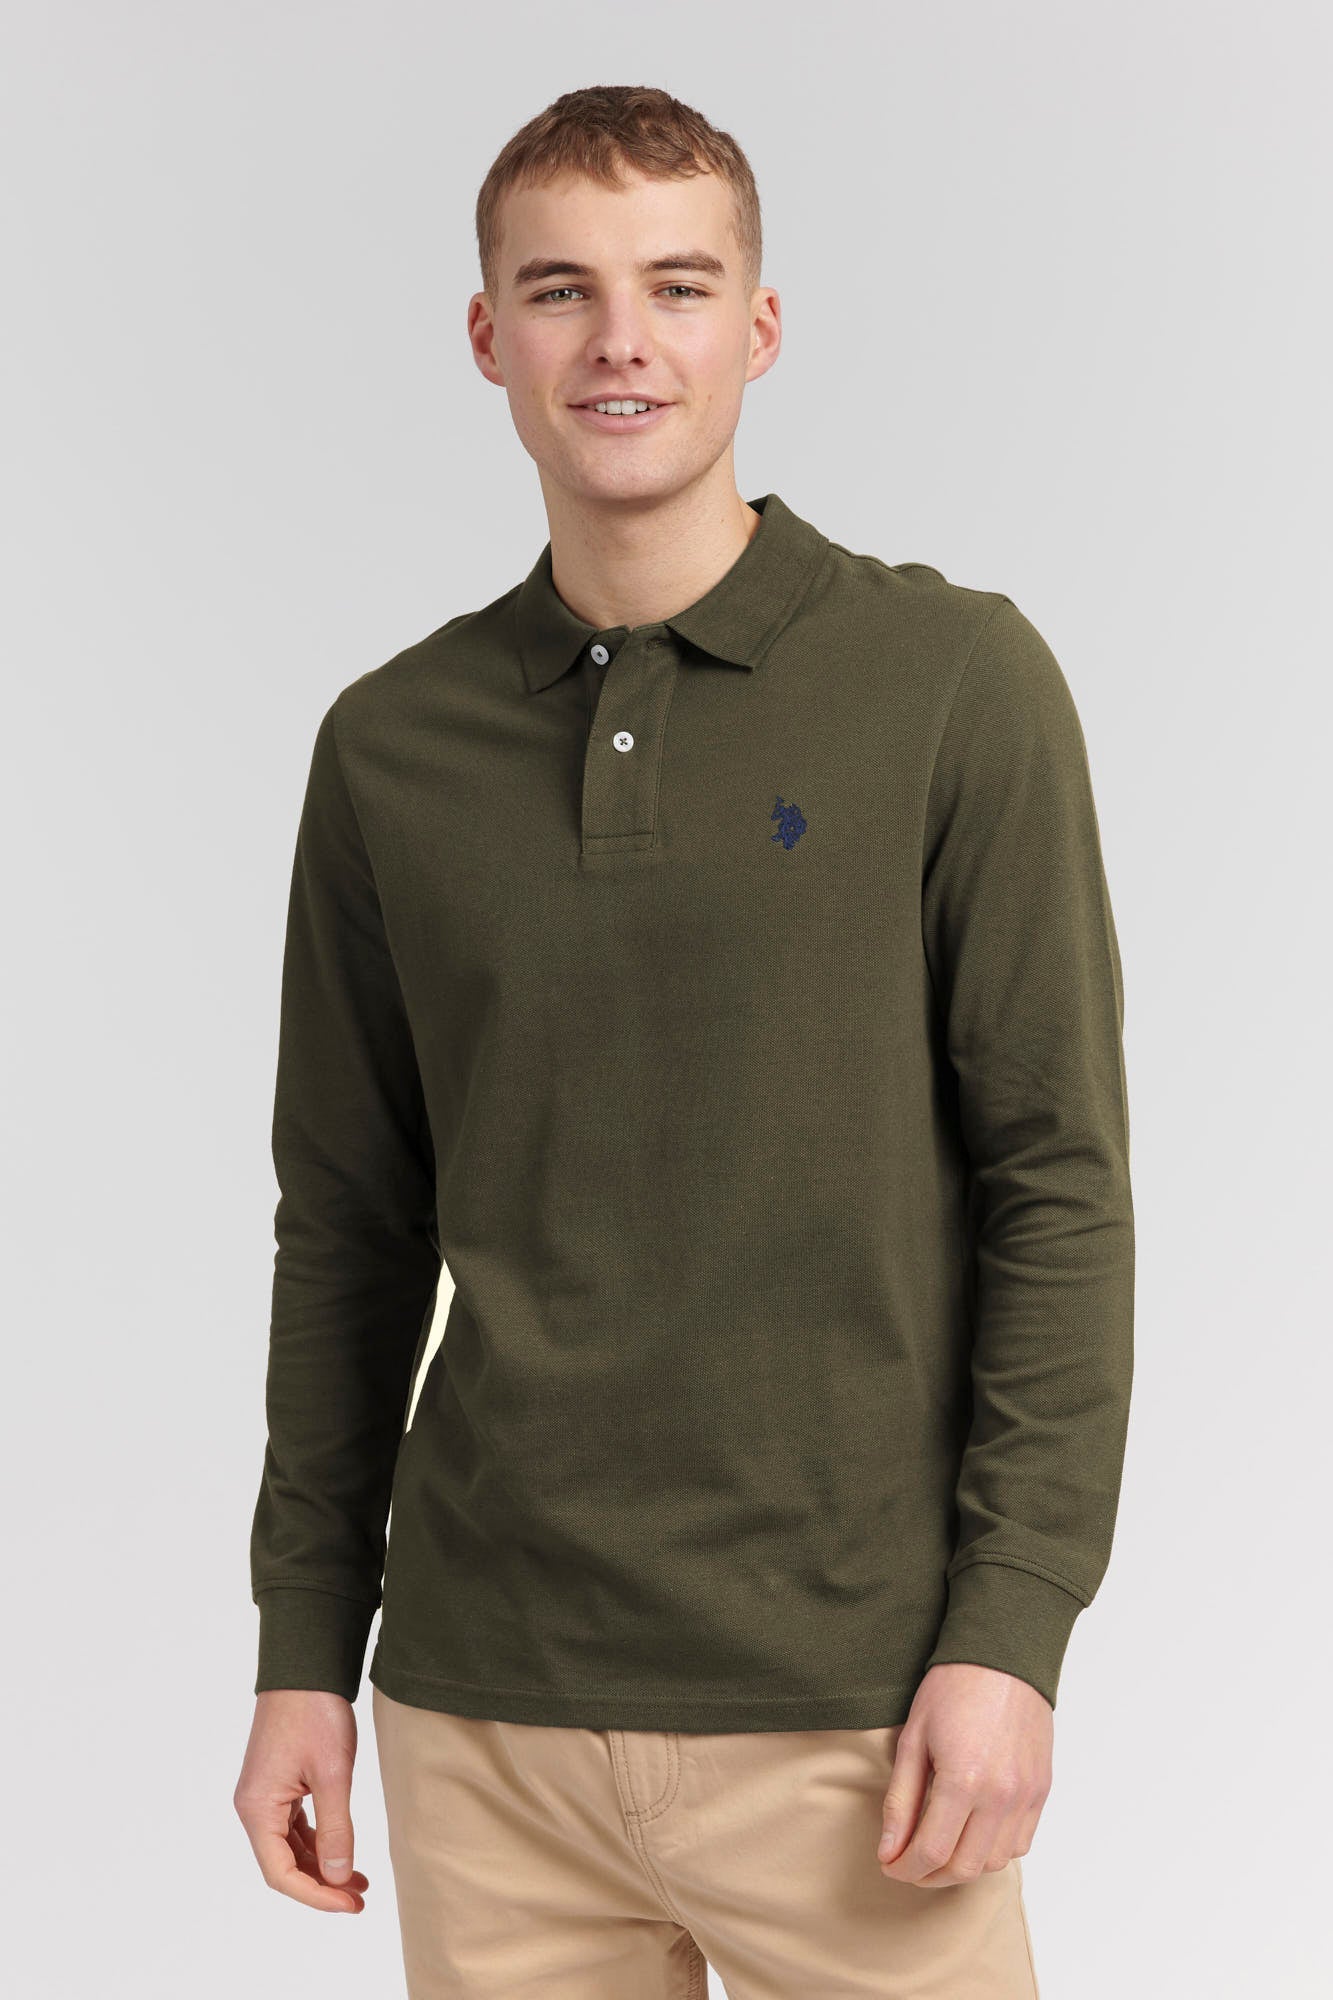 U.S. Polo Assn. Mens Long-Sleeve Polo Shirt in Forest Night